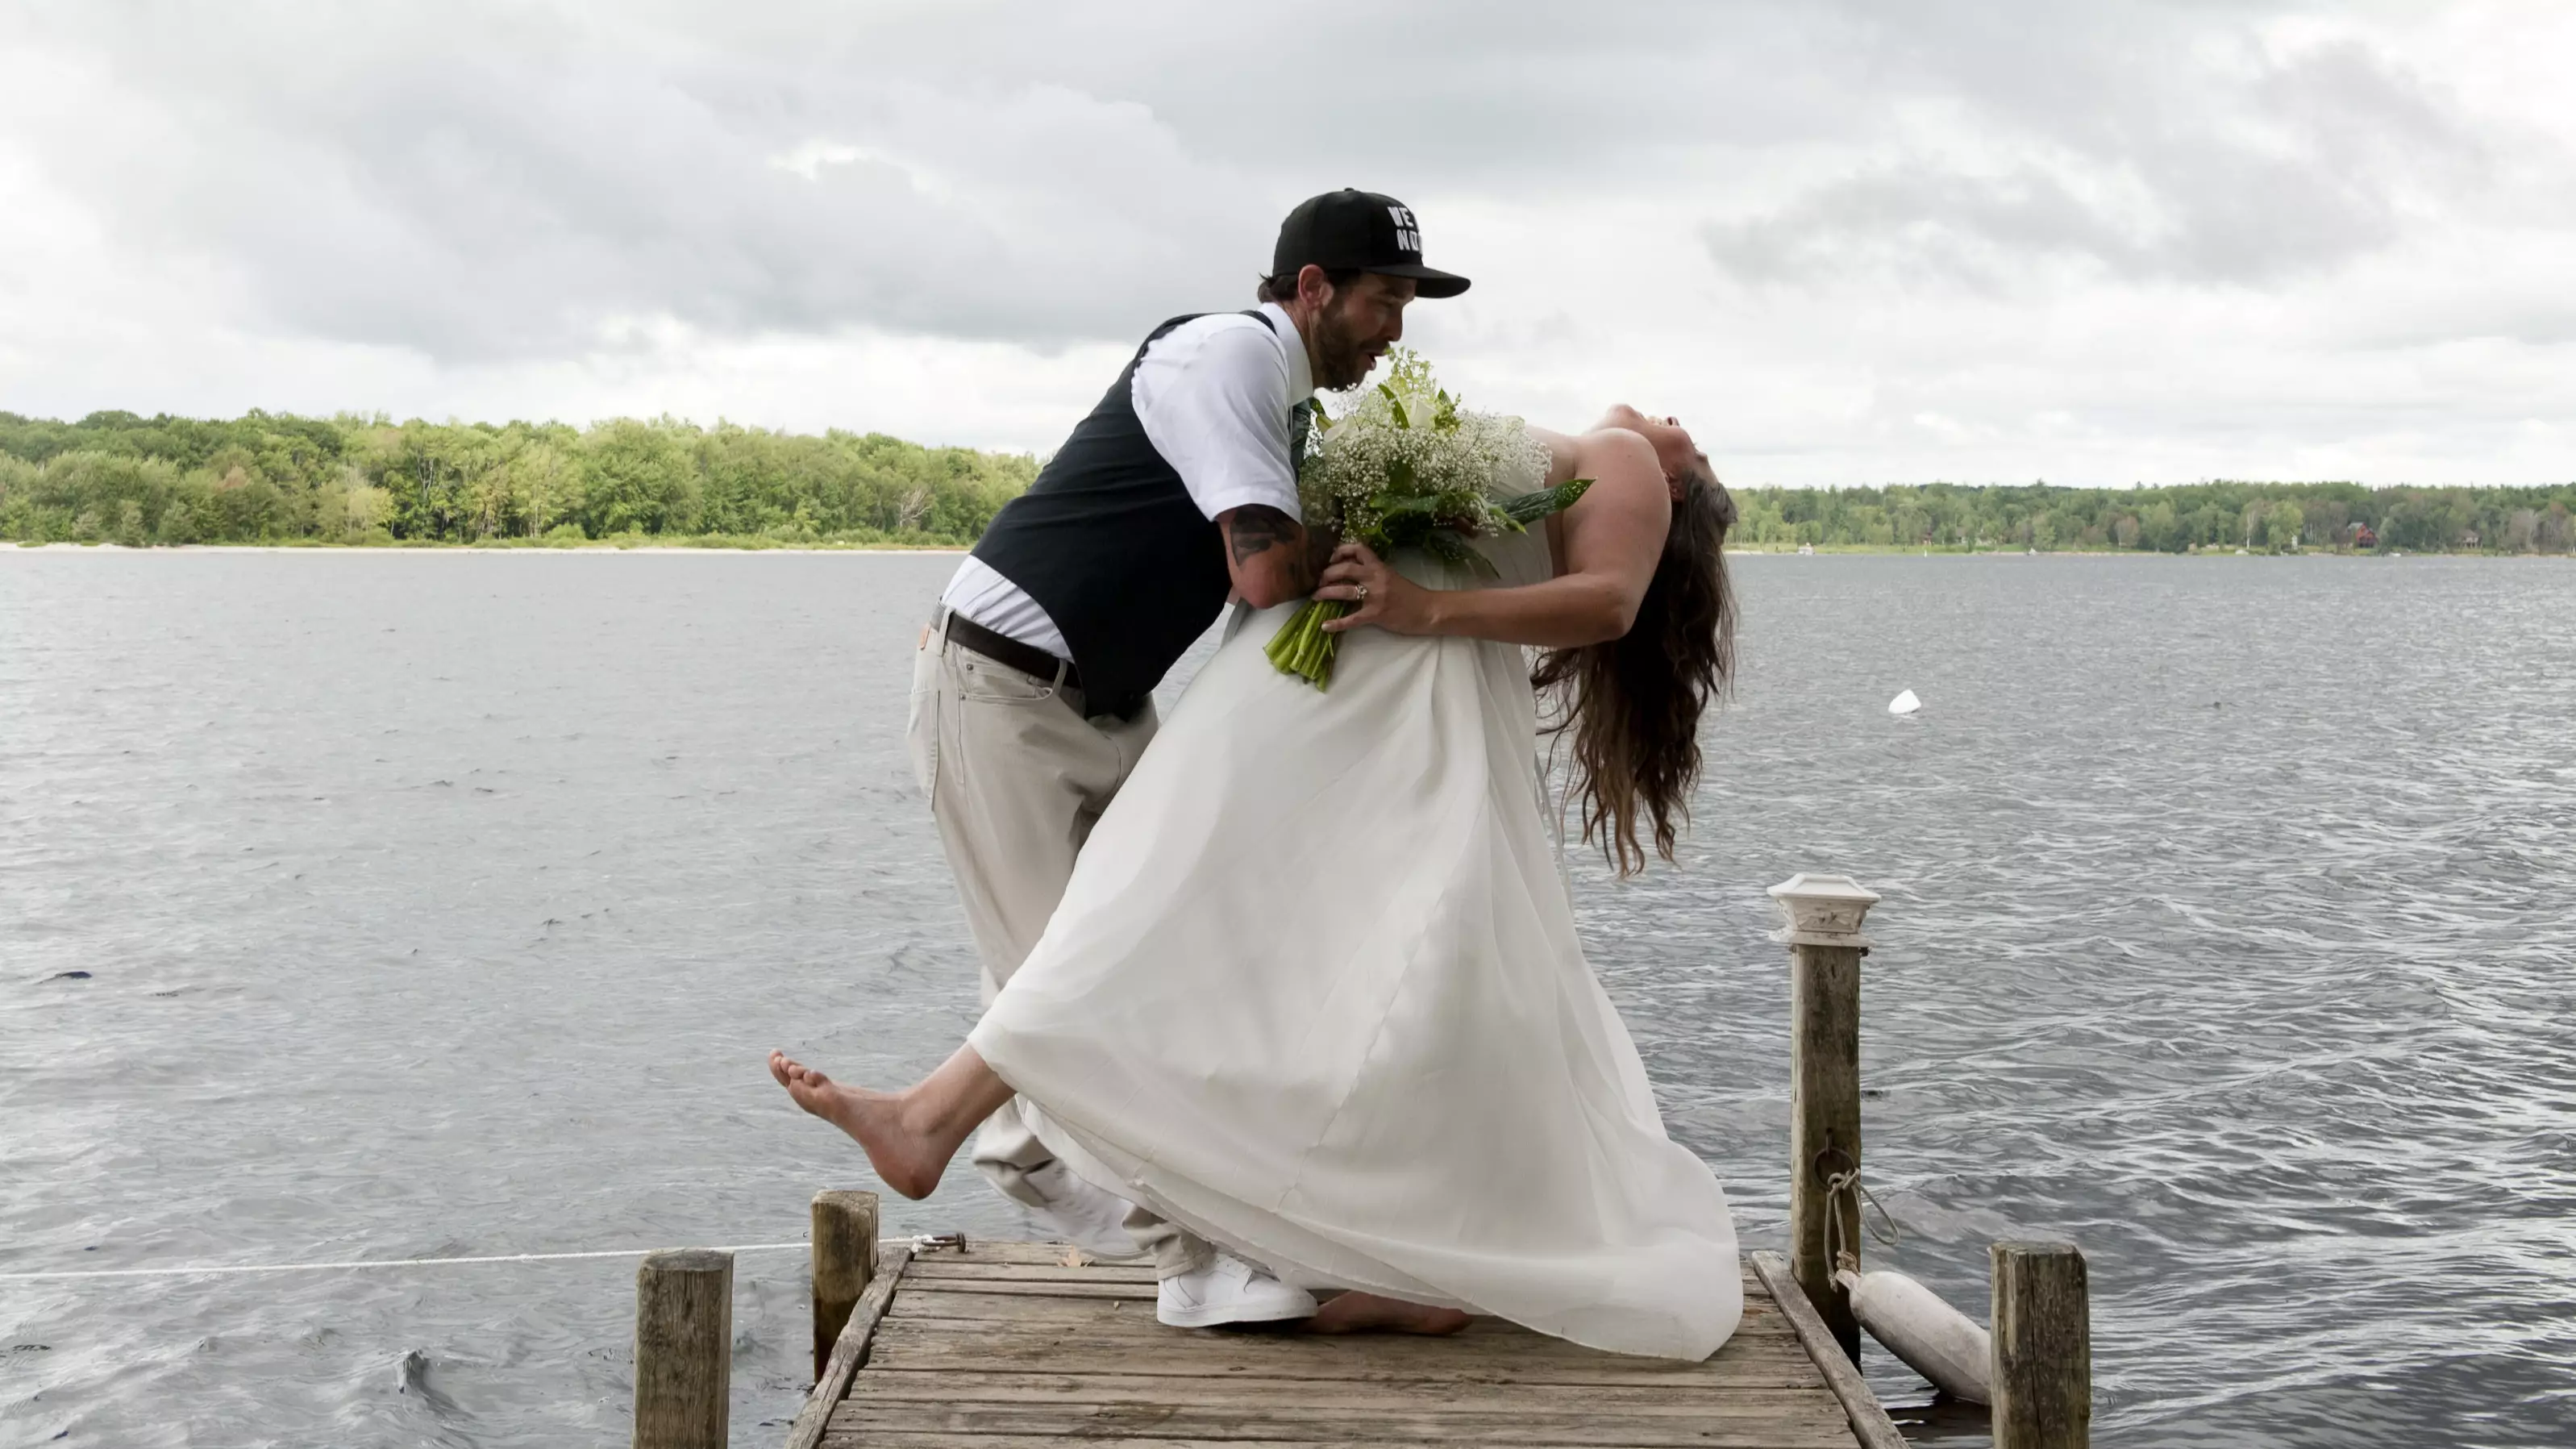 Hilarious Moment A Bride And Groom Took A Dip Recreating A Dance Move